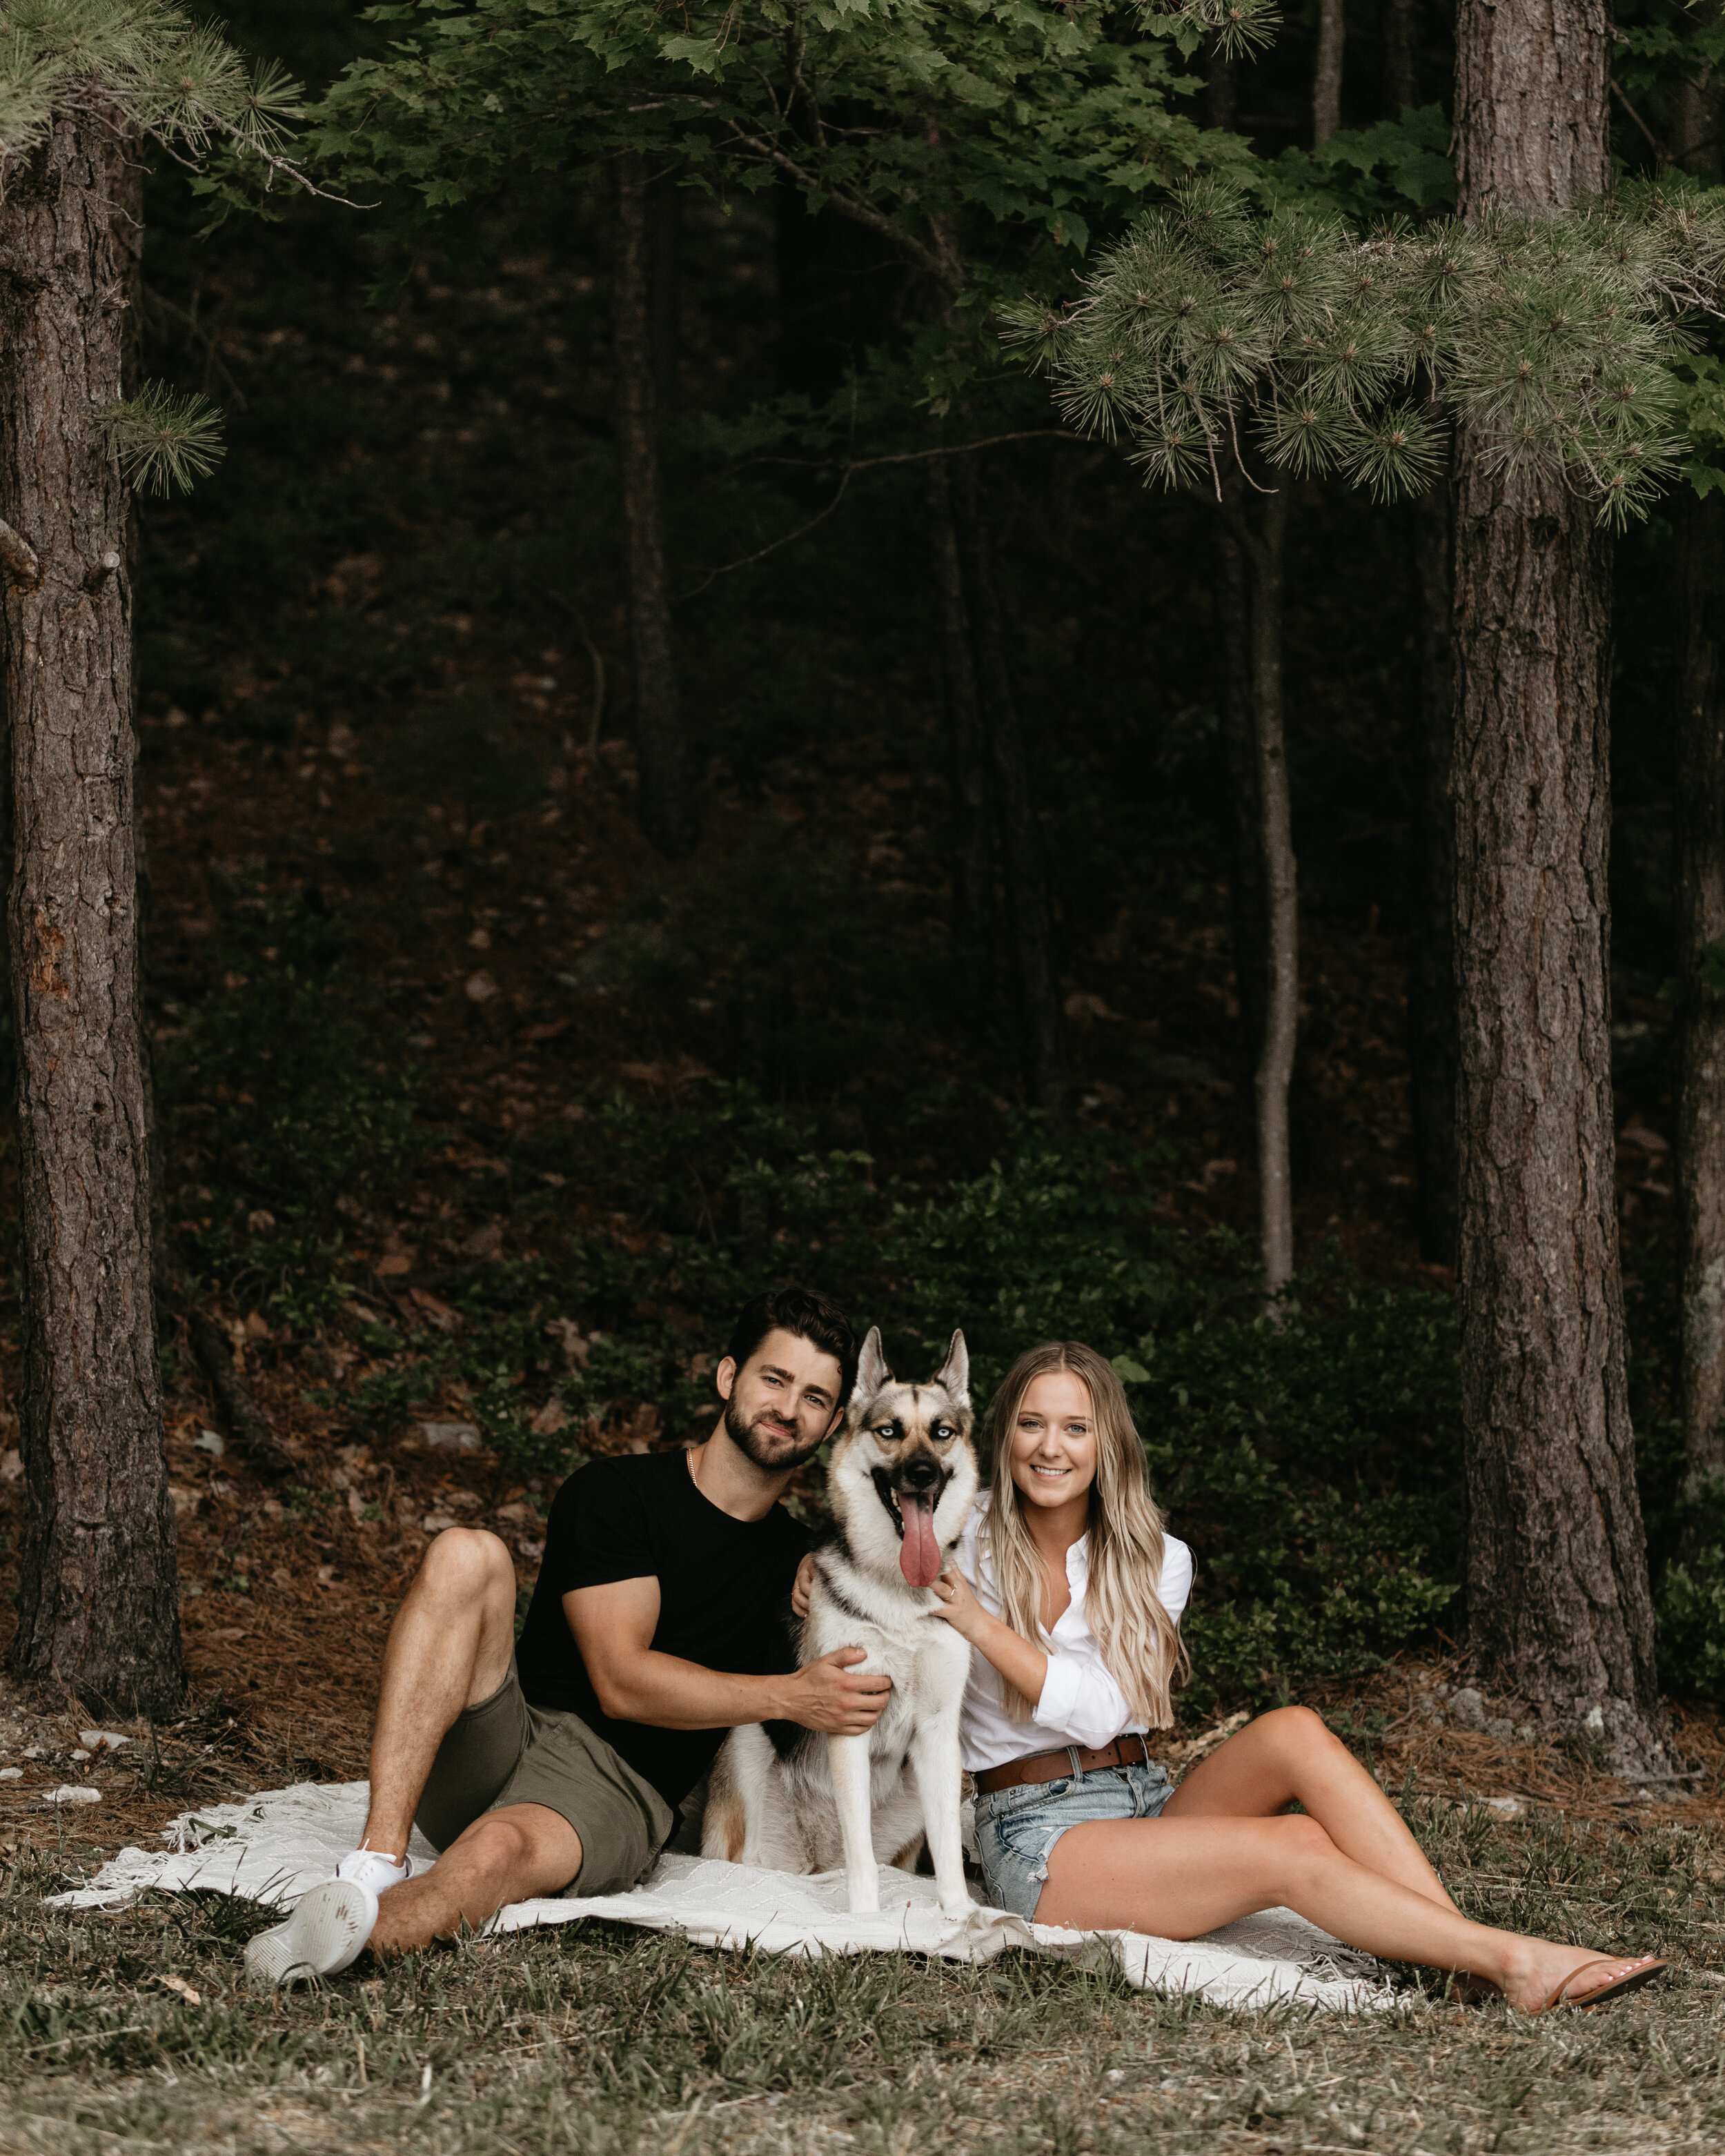 Nicole-Daacke-Photography-michaux-state-forest-elopement-adventure-engagement-session-pennsylvania-elopement-pa-elopement-photographer-gettysburg-photographer-state-park-elopement-engagement-session-pennsylvania-waterfall-152.jpg